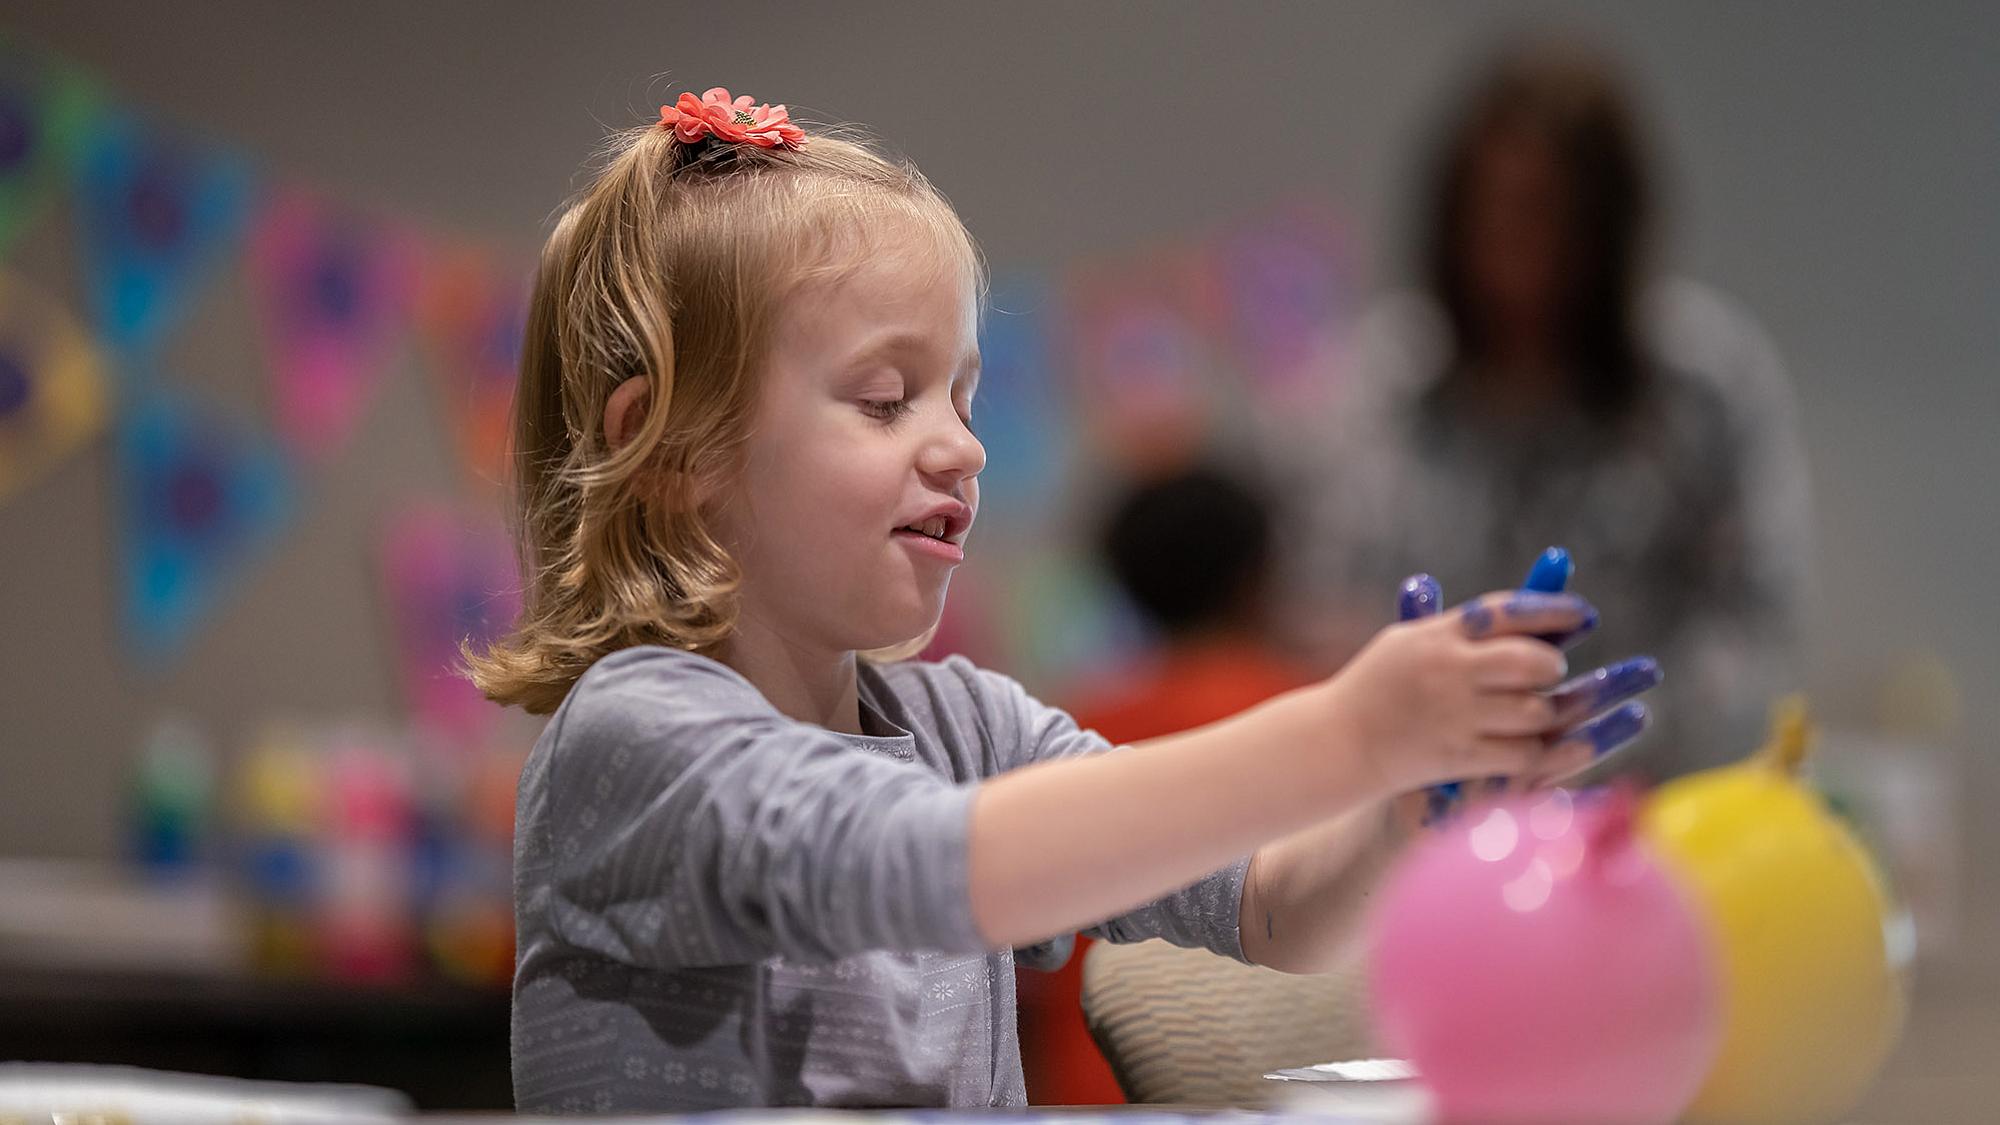 Maeve combines finger-painting with balloon-painting.